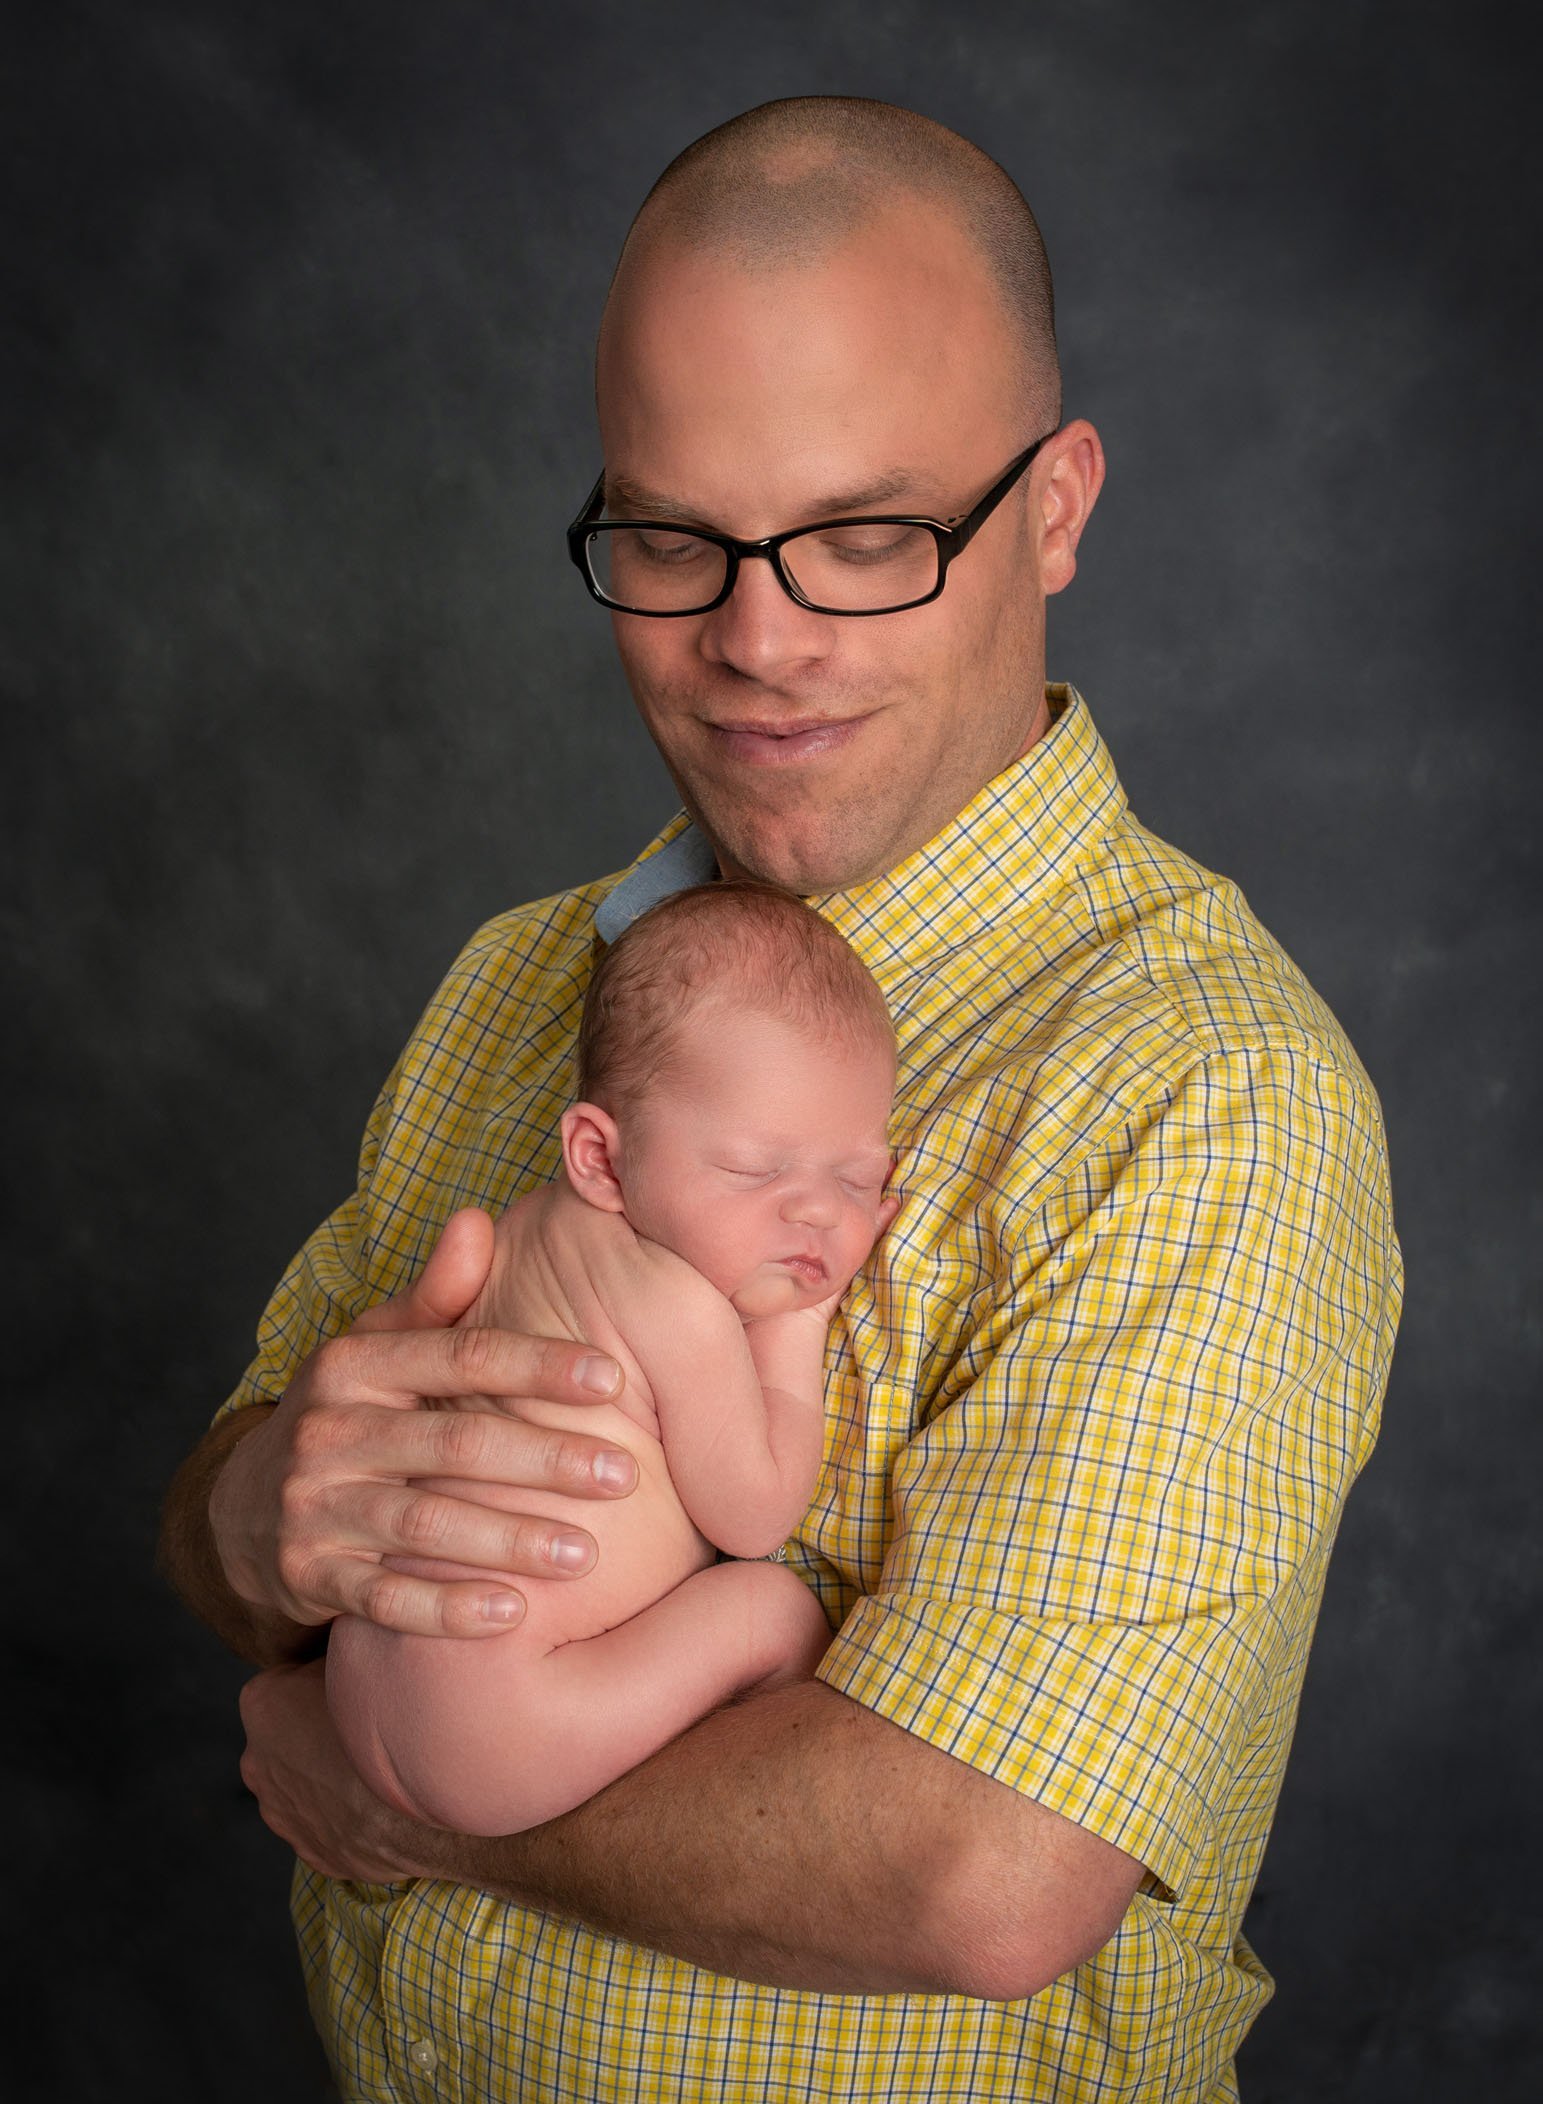 dad wearing glasses holds his newborn asleep on his chest